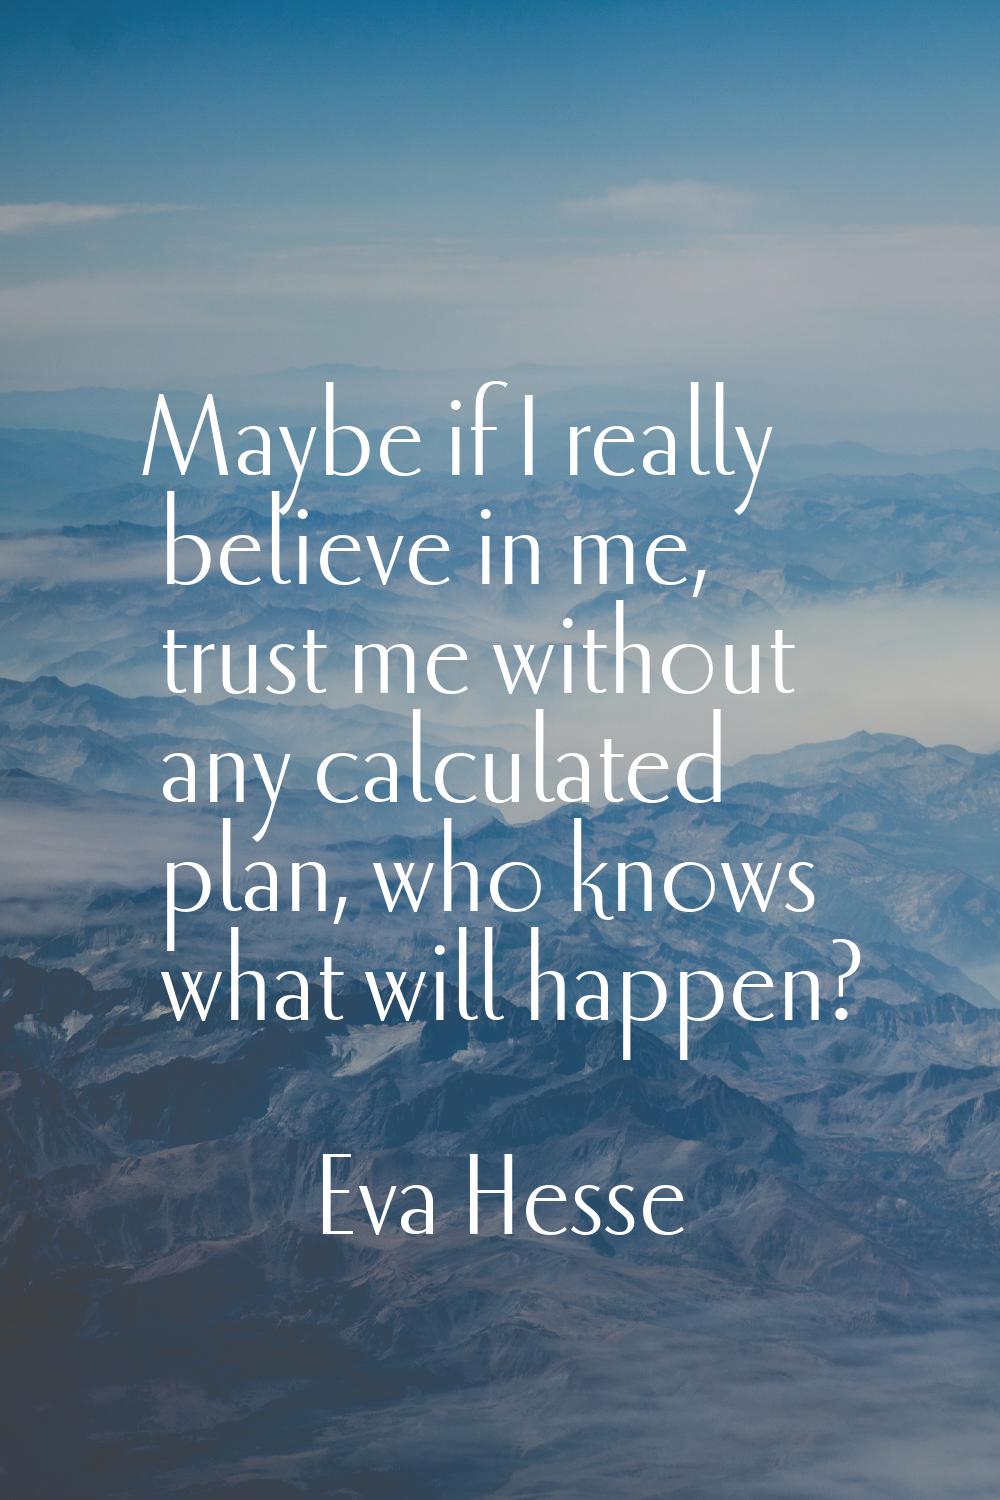 Maybe if I really believe in me, trust me without any calculated plan, who knows what will happen?